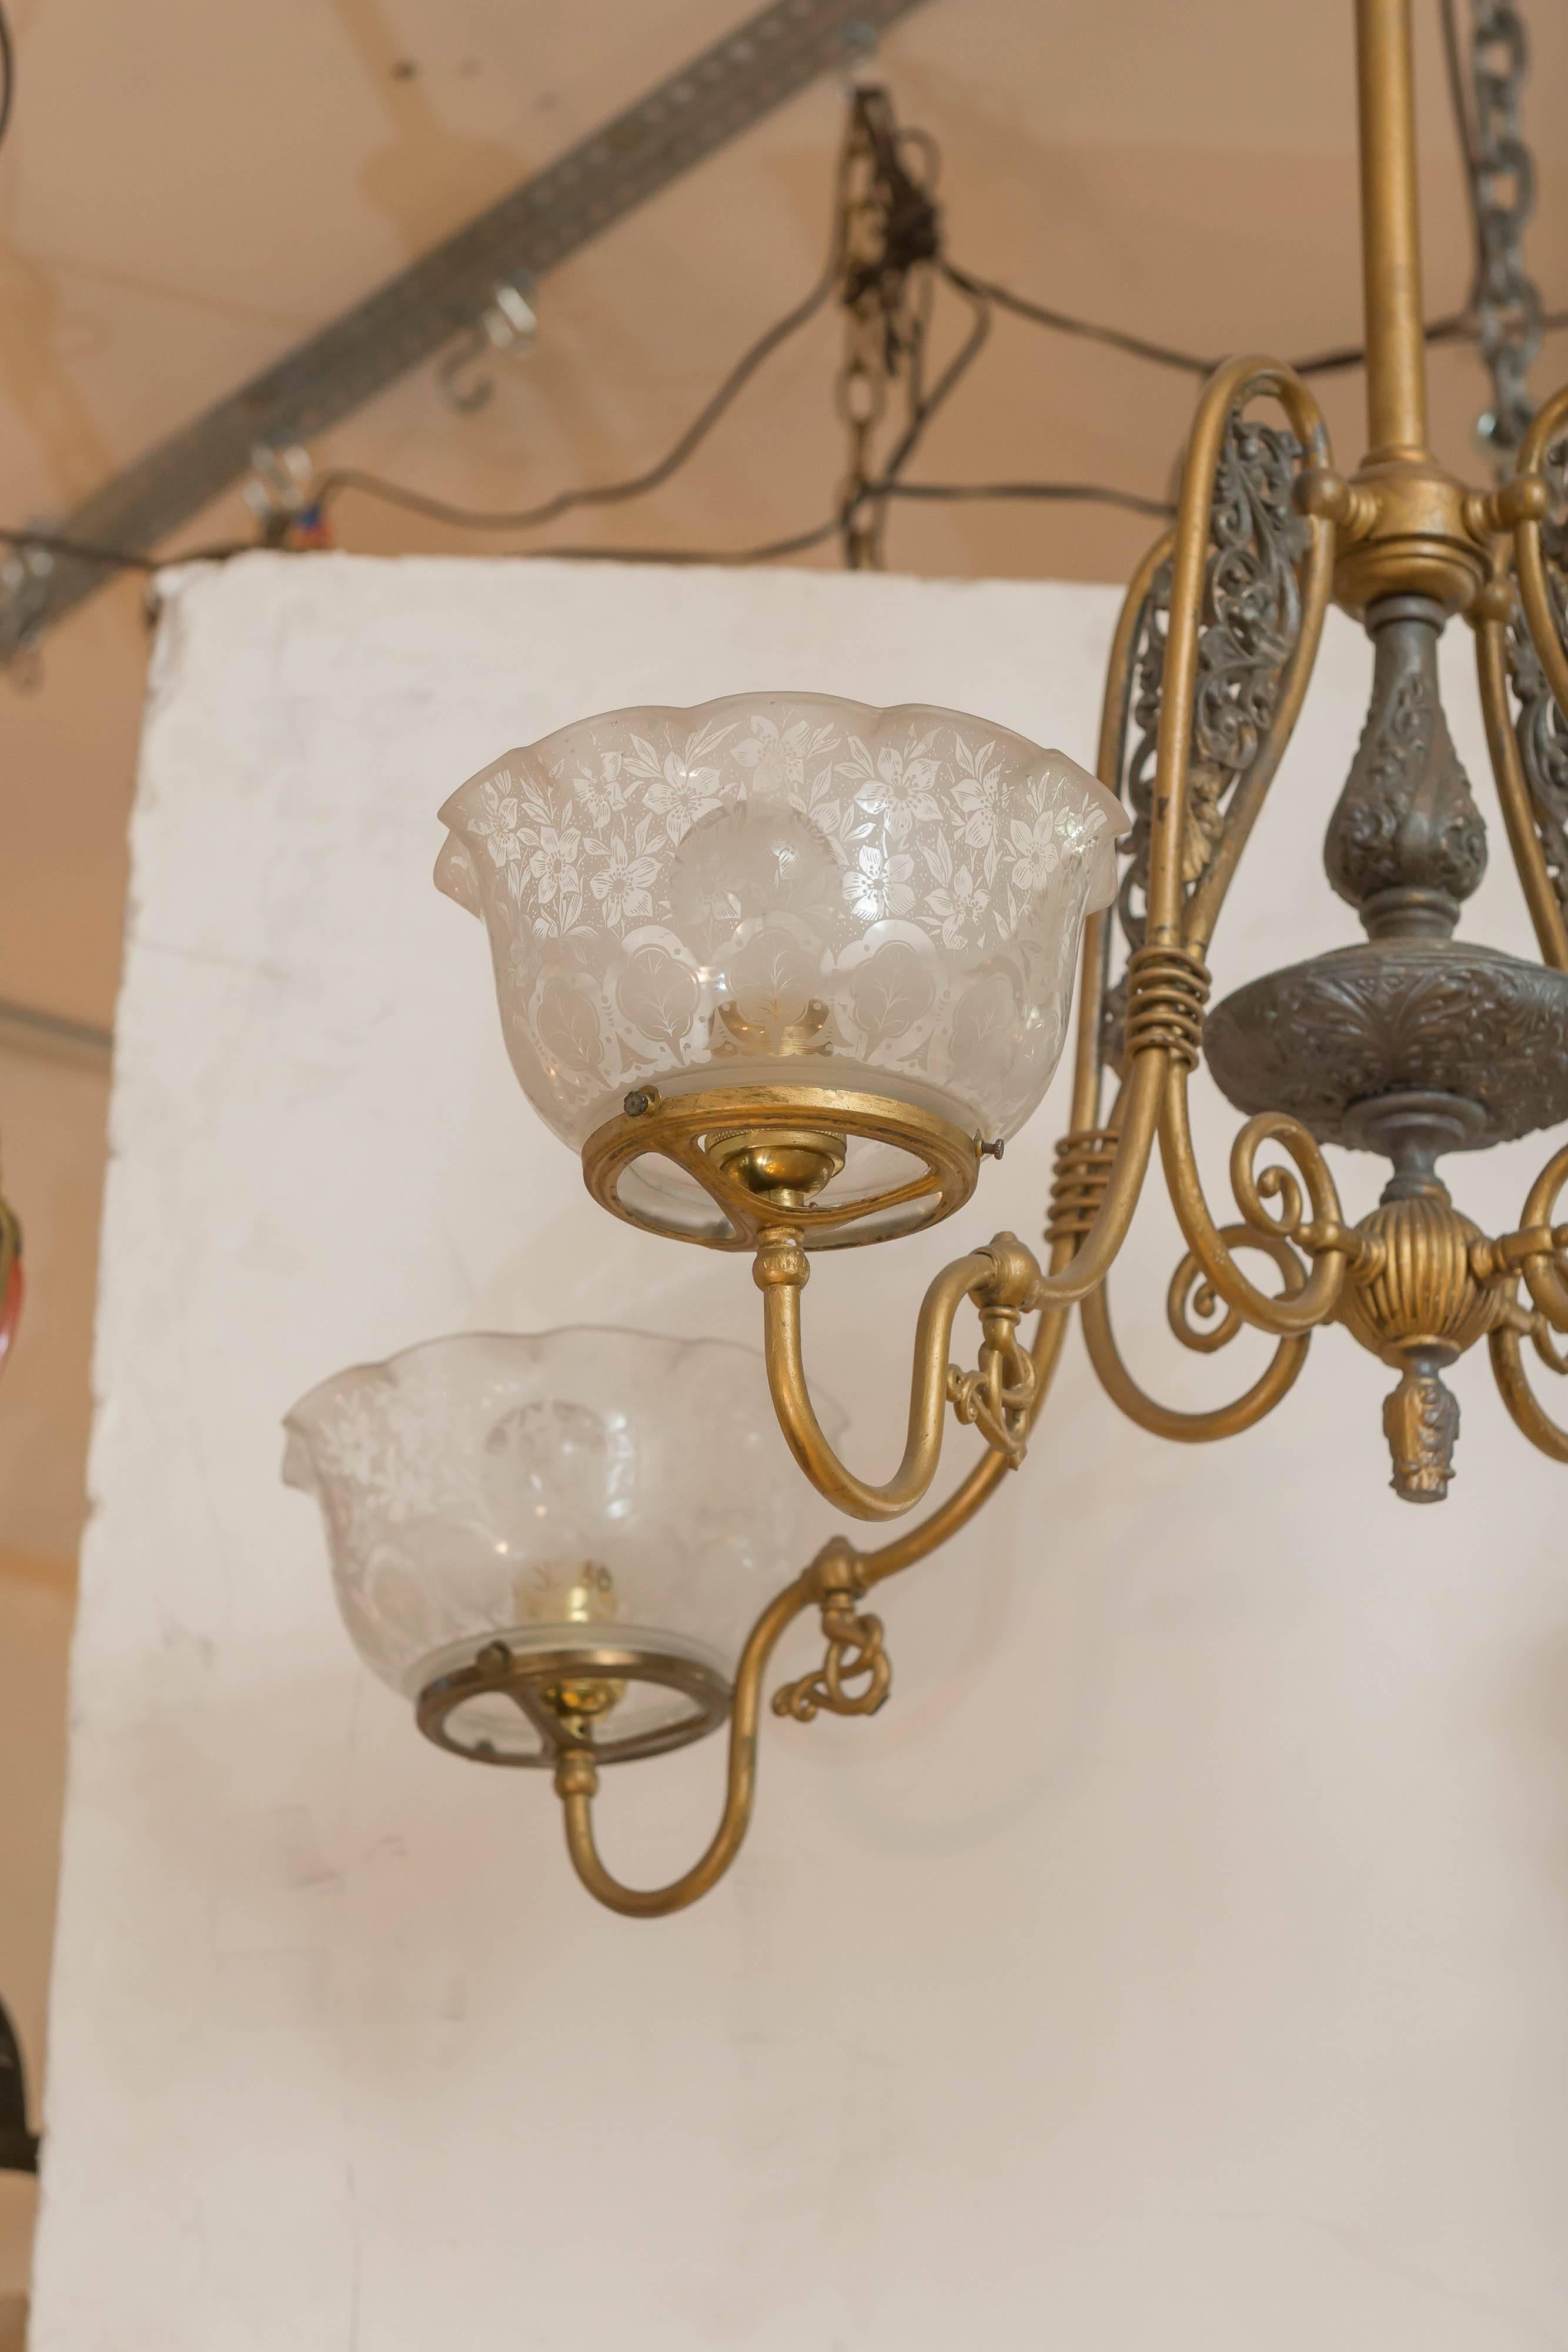 This nice four-arm gas chandelier has been converted to electricity for your convenience. The body has a nice original two-tone finish, and the shades are period to the light. Please note the gas keys. They are really neat being so twisted like a